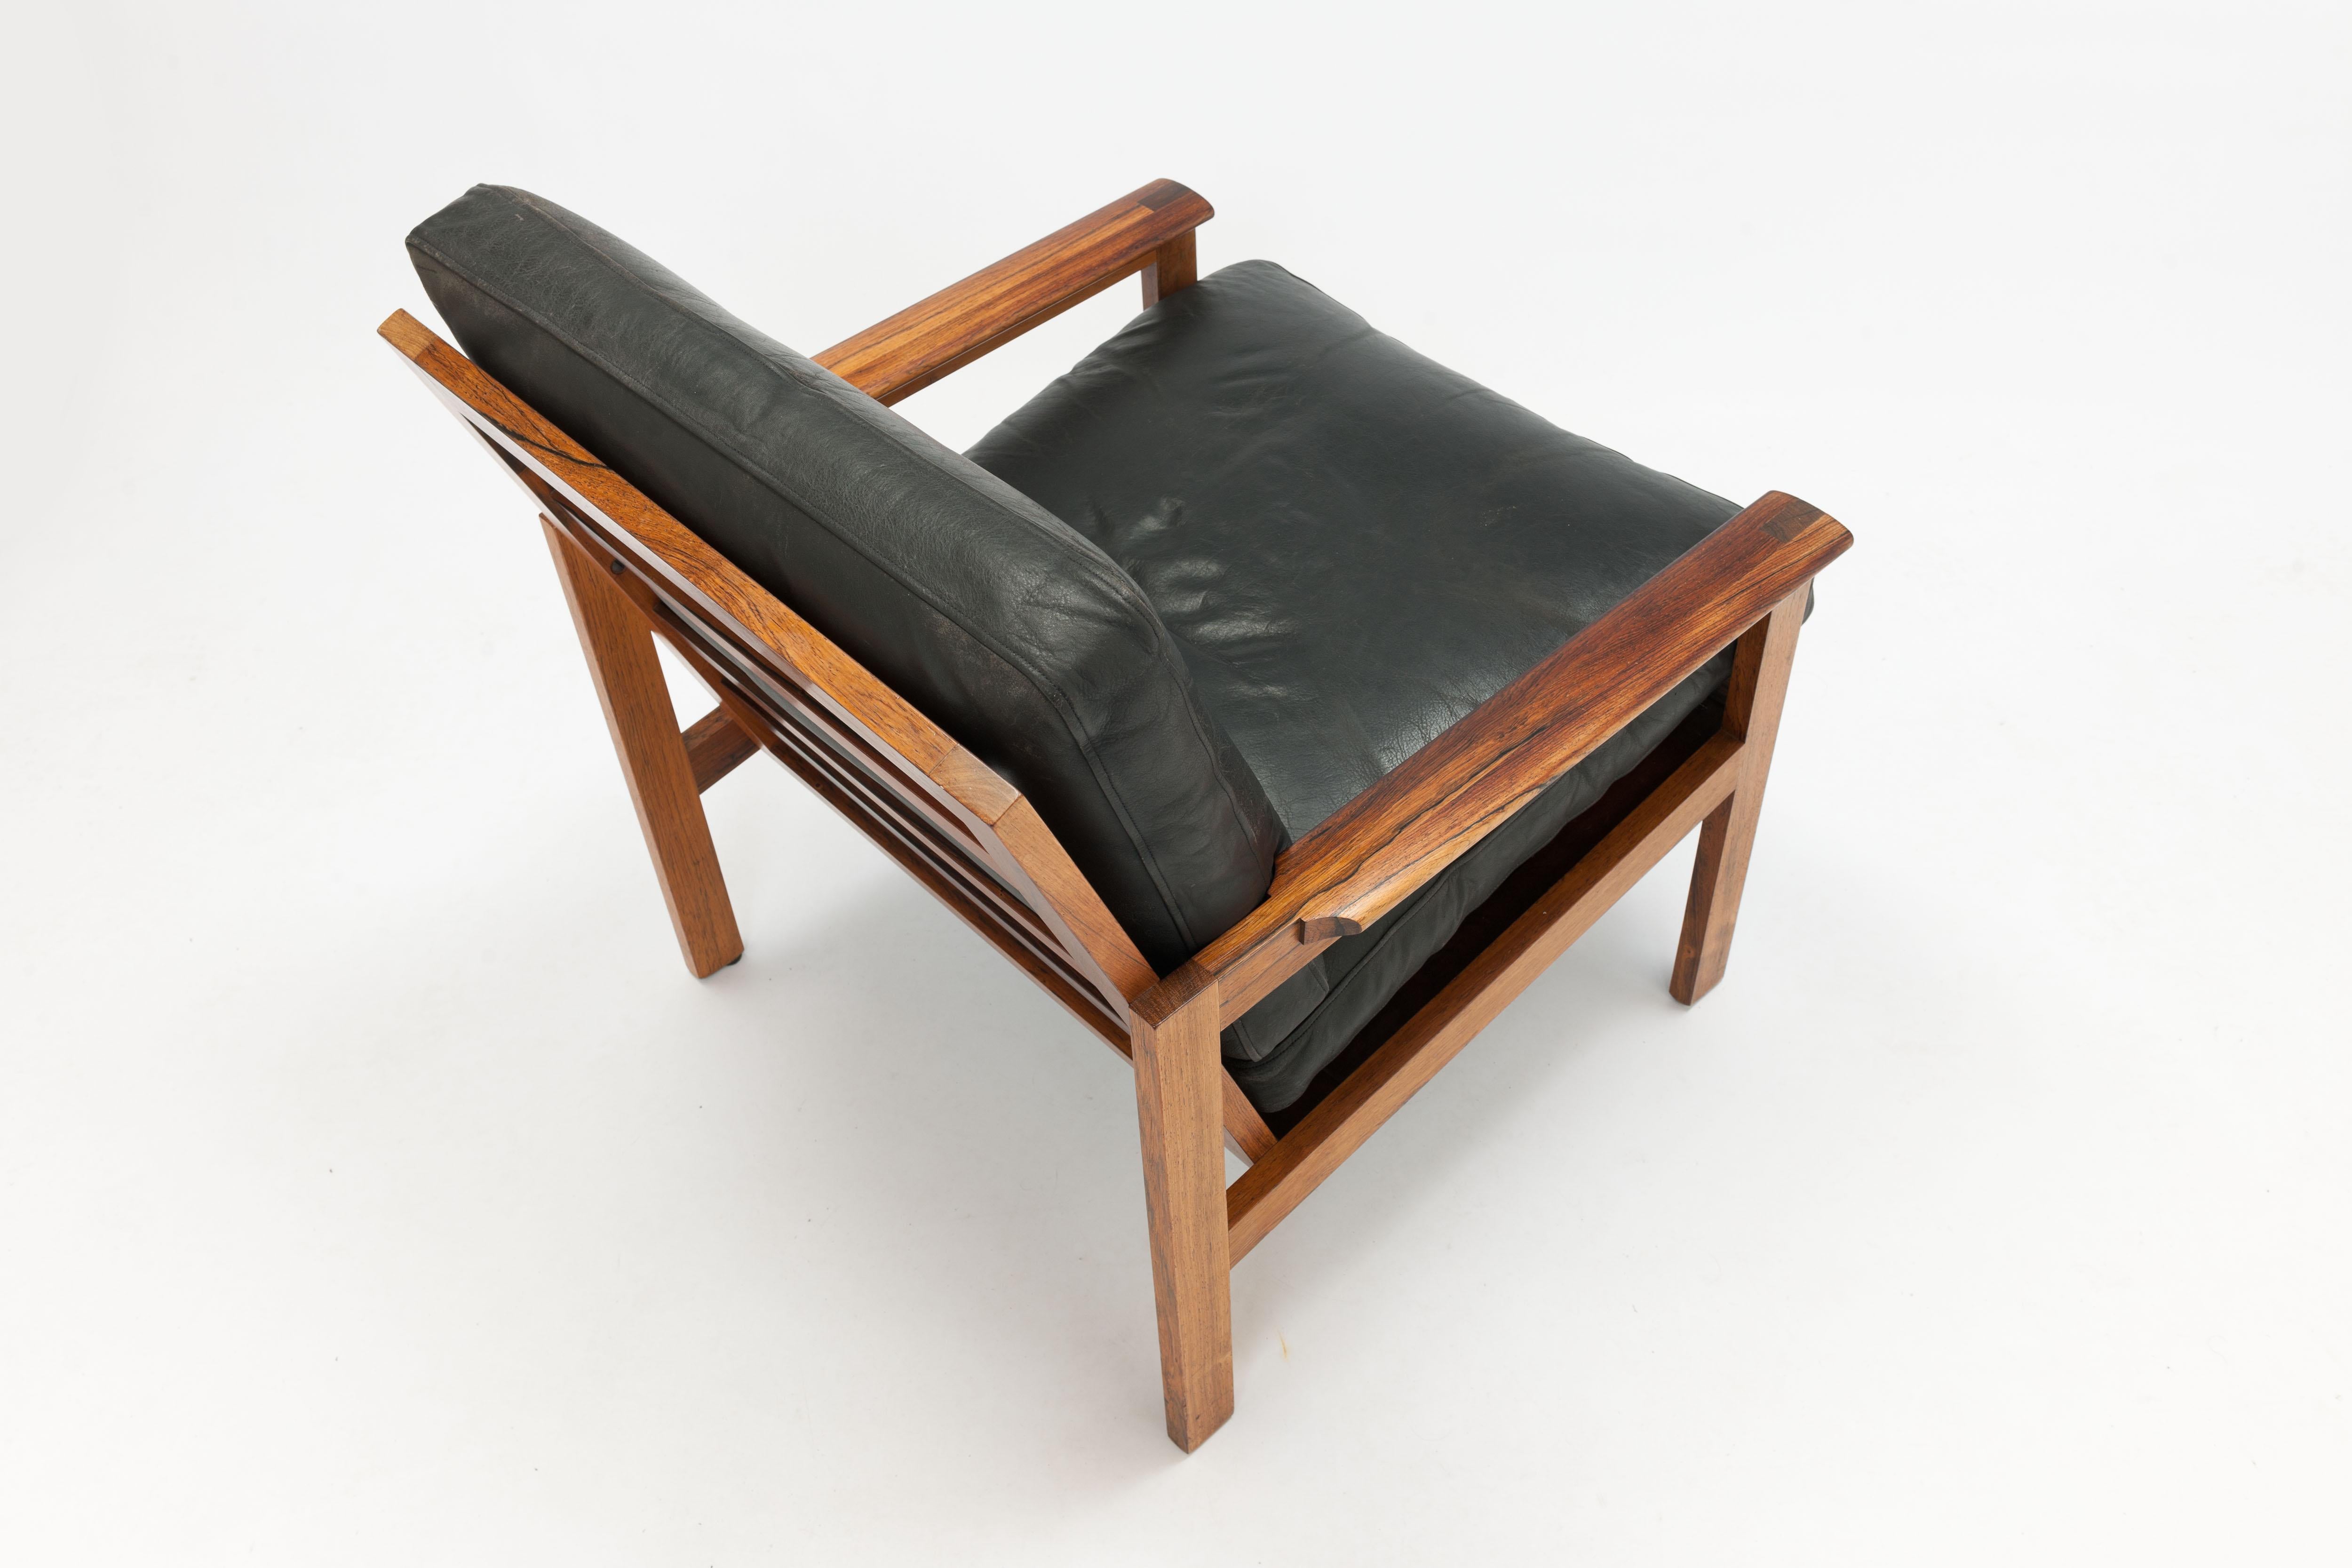 Scandinavian Modern Rosewood & Black Leather Capella Arm Chair by Illum Wikkelsø, Pair Available